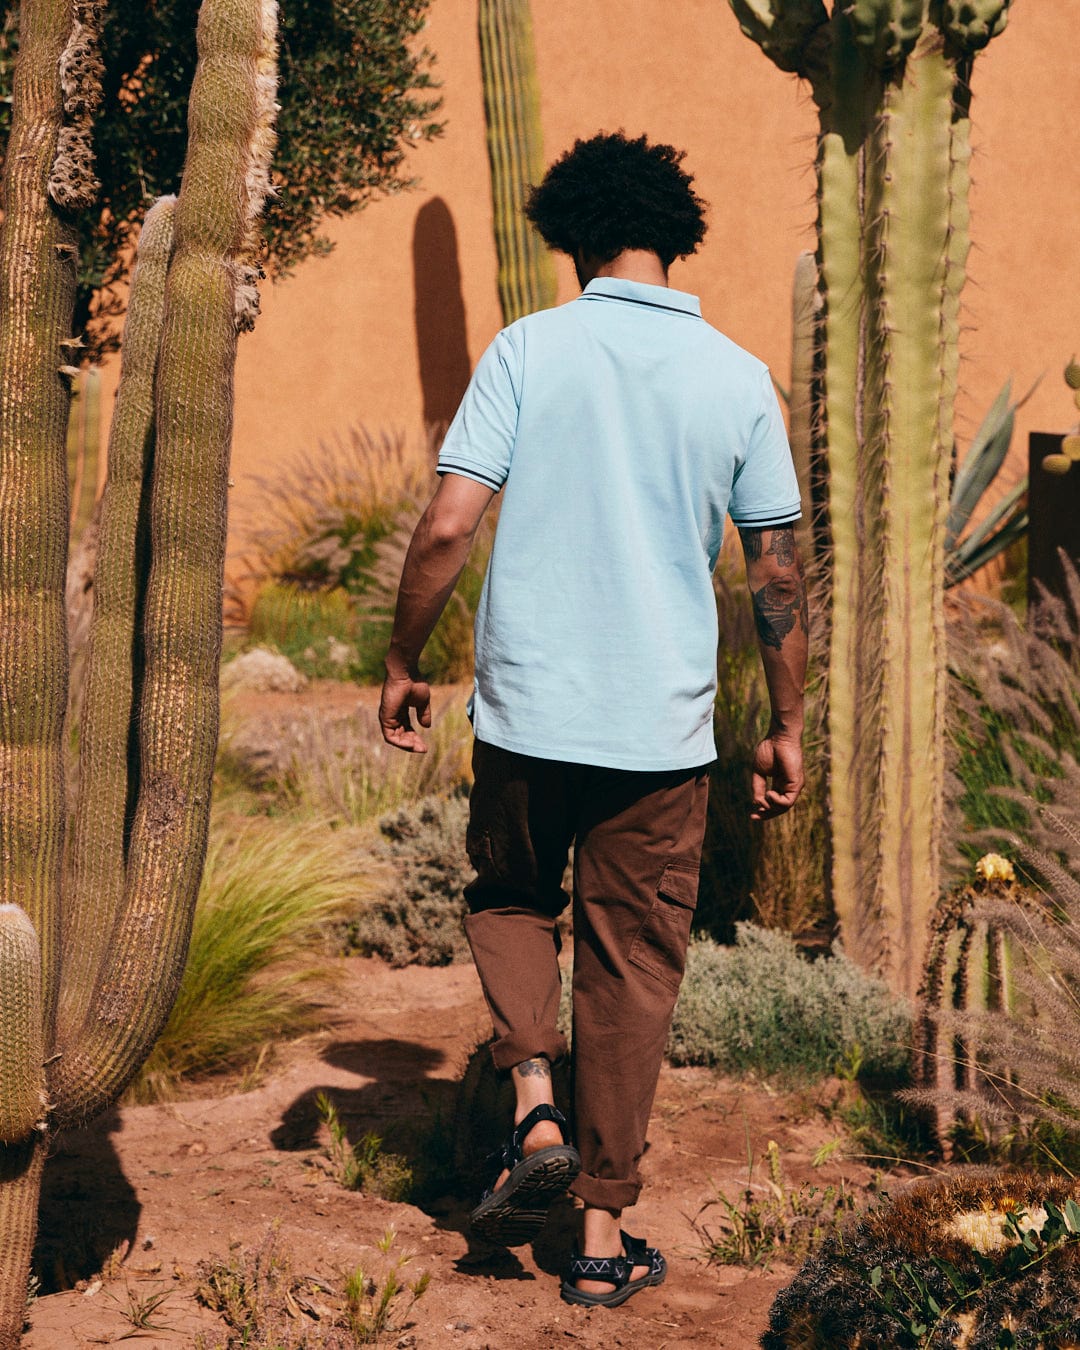 A person with an afro hairstyle, wearing a 100% cotton Saltrock Strike Logo - Mens Short Sleeve Polo Shirt - Light Blue and brown pants, walking away through a desert garden filled with tall cacti and other desert plants.